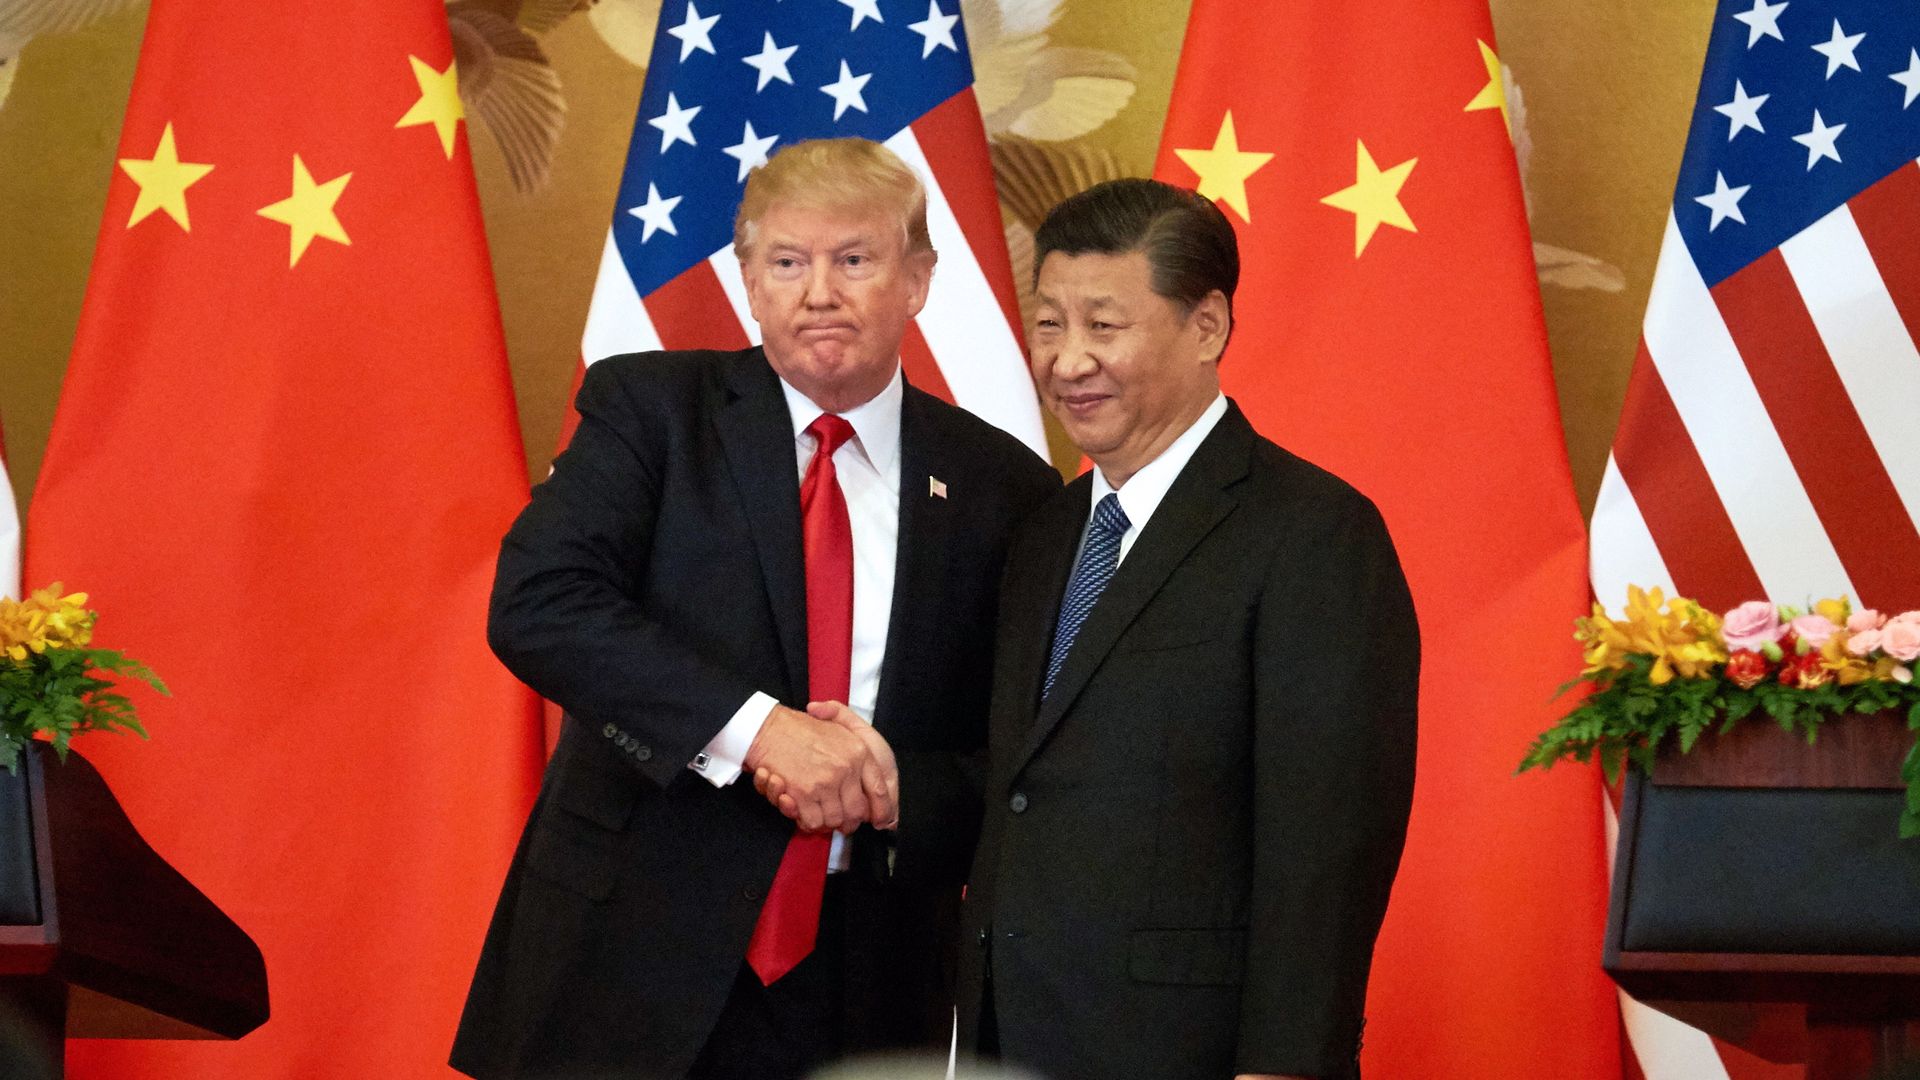 Trump and China's president Xi